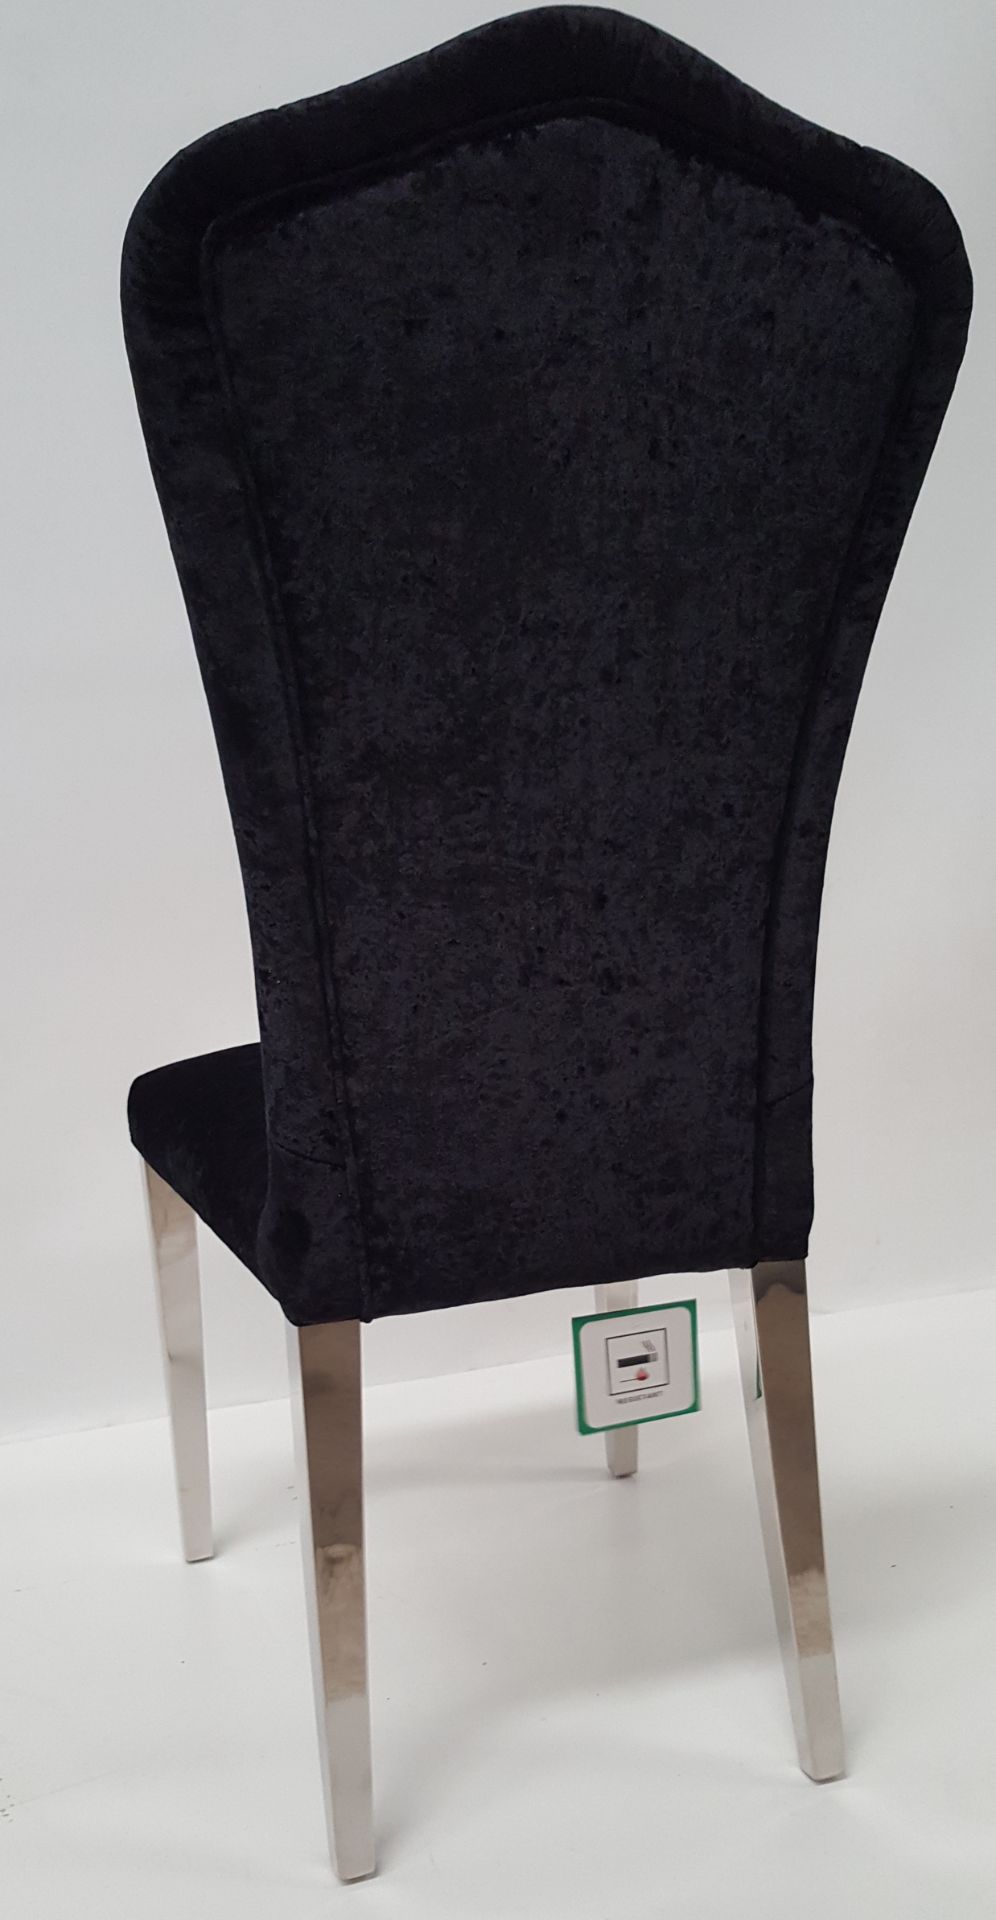 6 x STYLISH BLACK CRUSHED VELVET DINING TABLE CHAIRS - CL408 - Location: Altrincham WA14 - Image 5 of 6